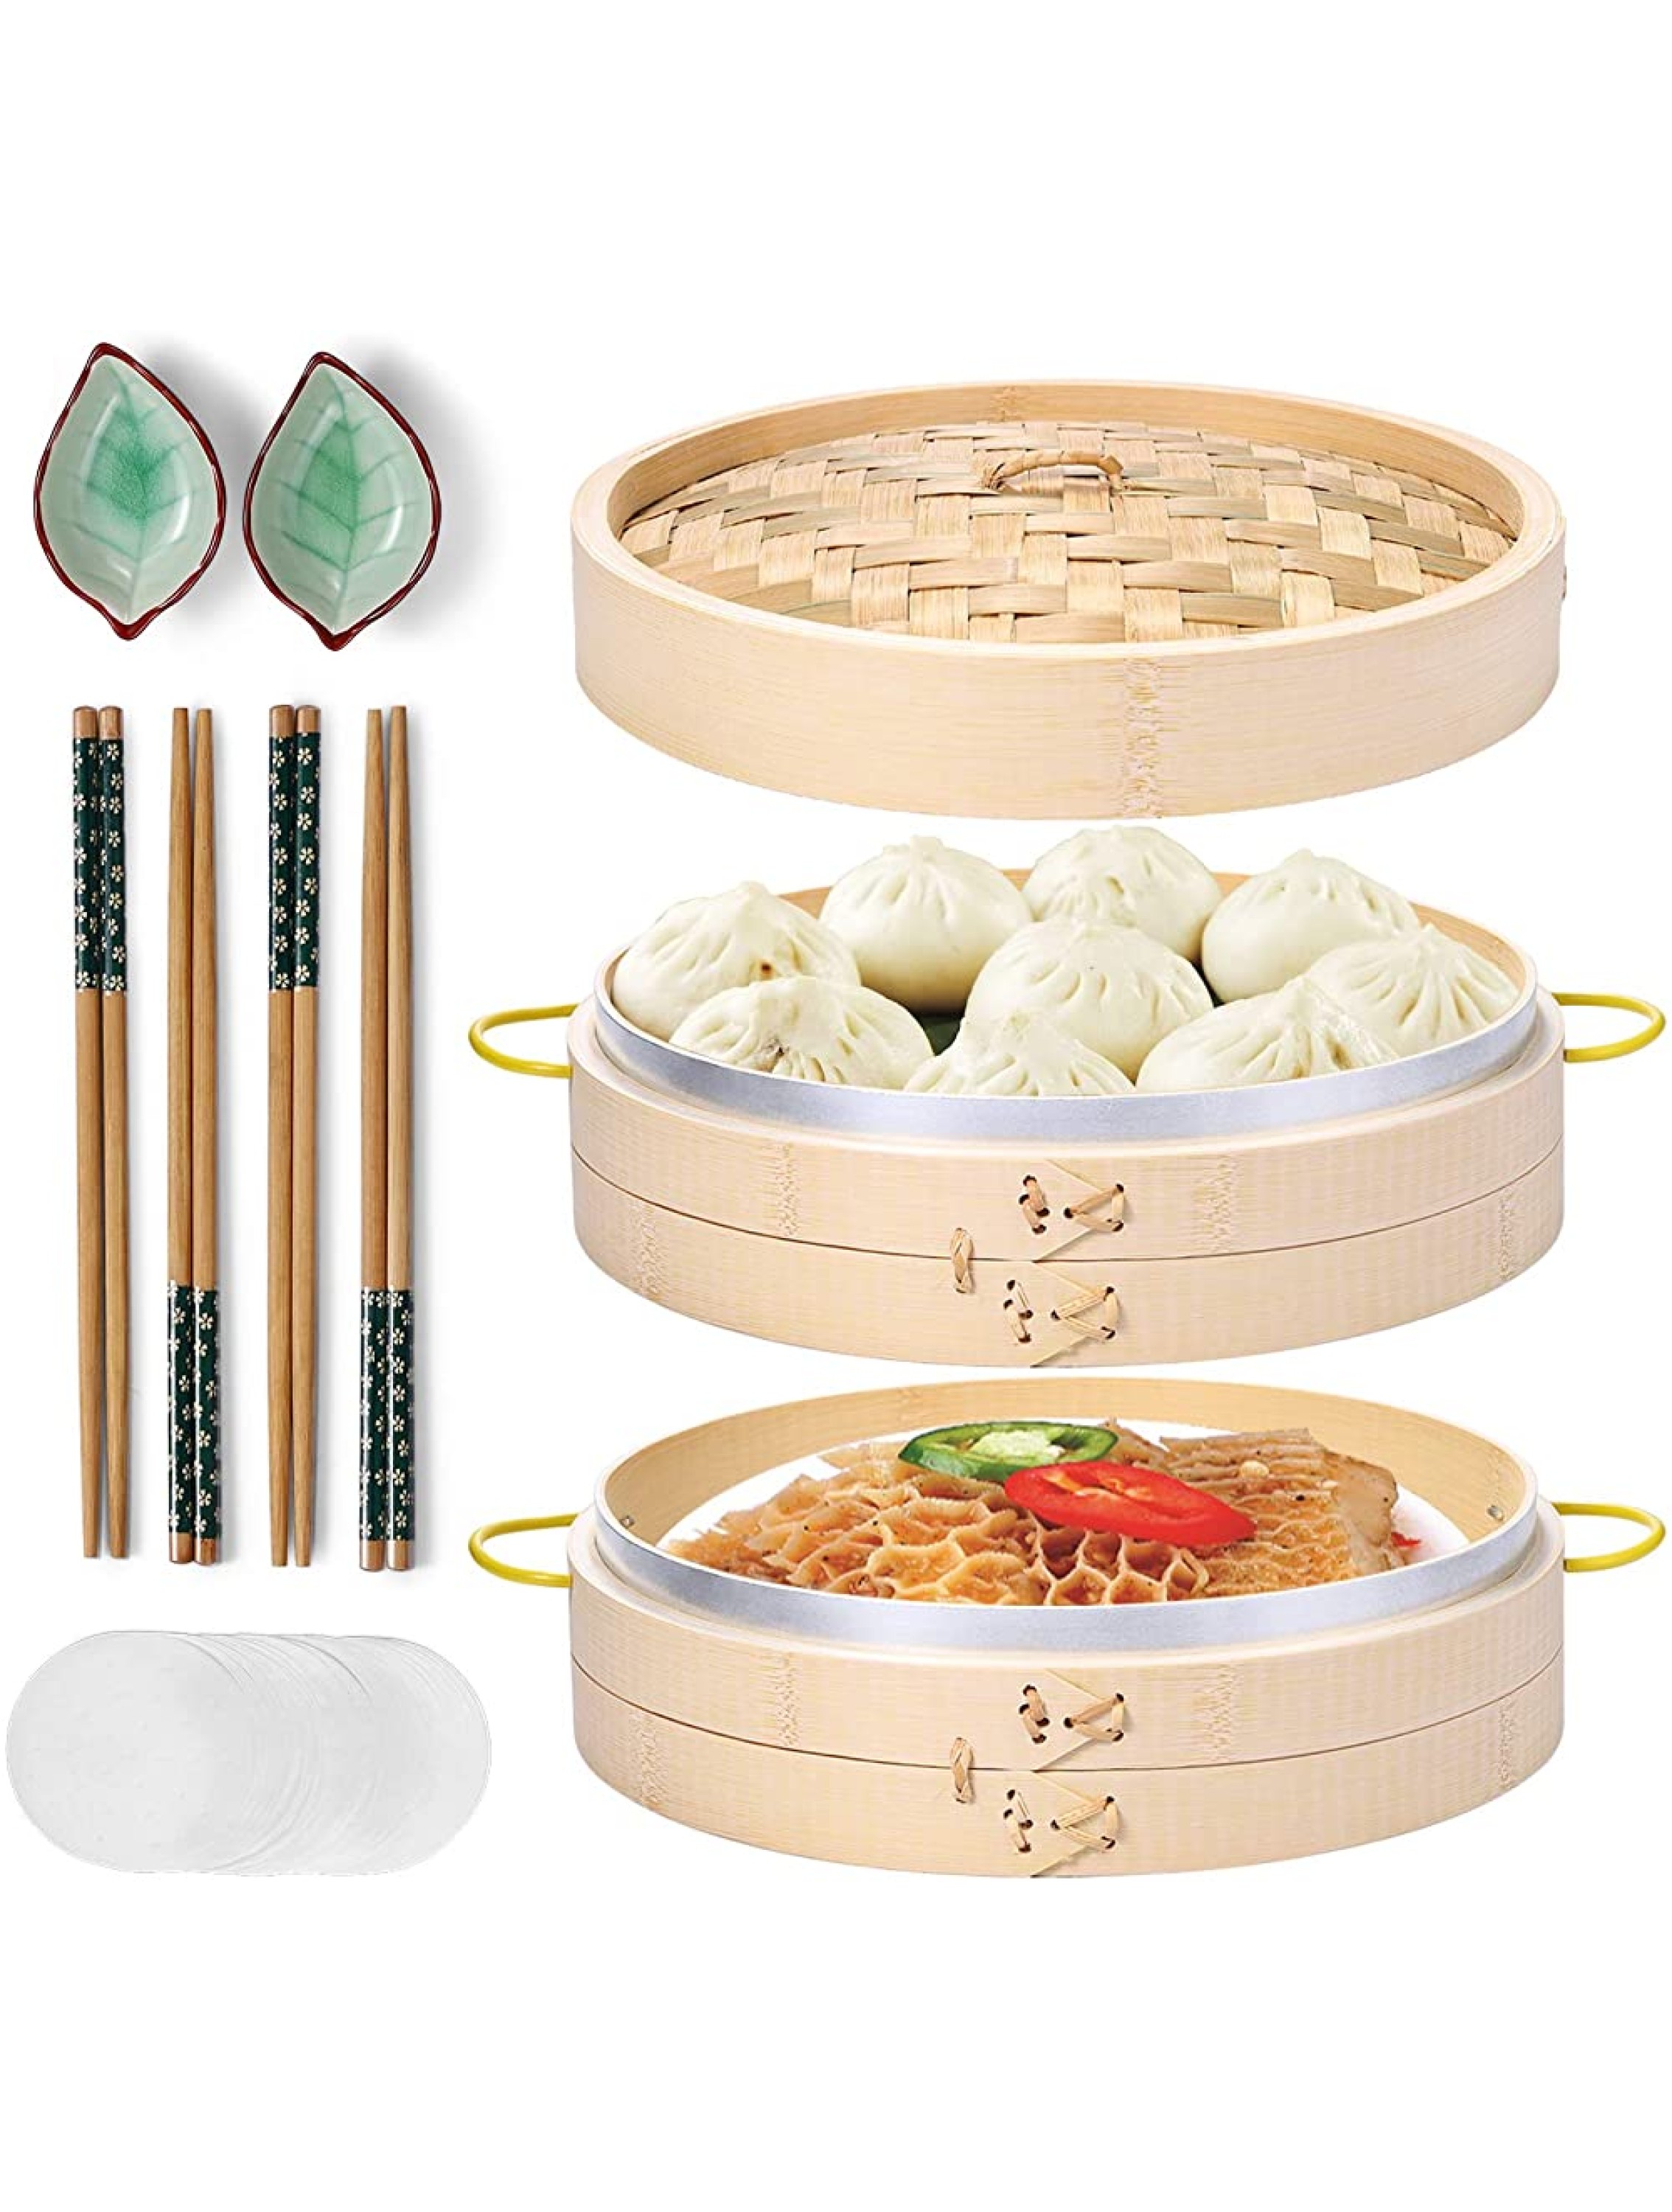 MacaRio Bamboo Steamer Basket Set 10 inch Steamer for Cooking with Side Handles Chopsticks Ceramic Sauce Dishes Paper Liners for Dim Sum Dumplings Buns Seafoods Rice Asian Foods - B2UDKPXDL